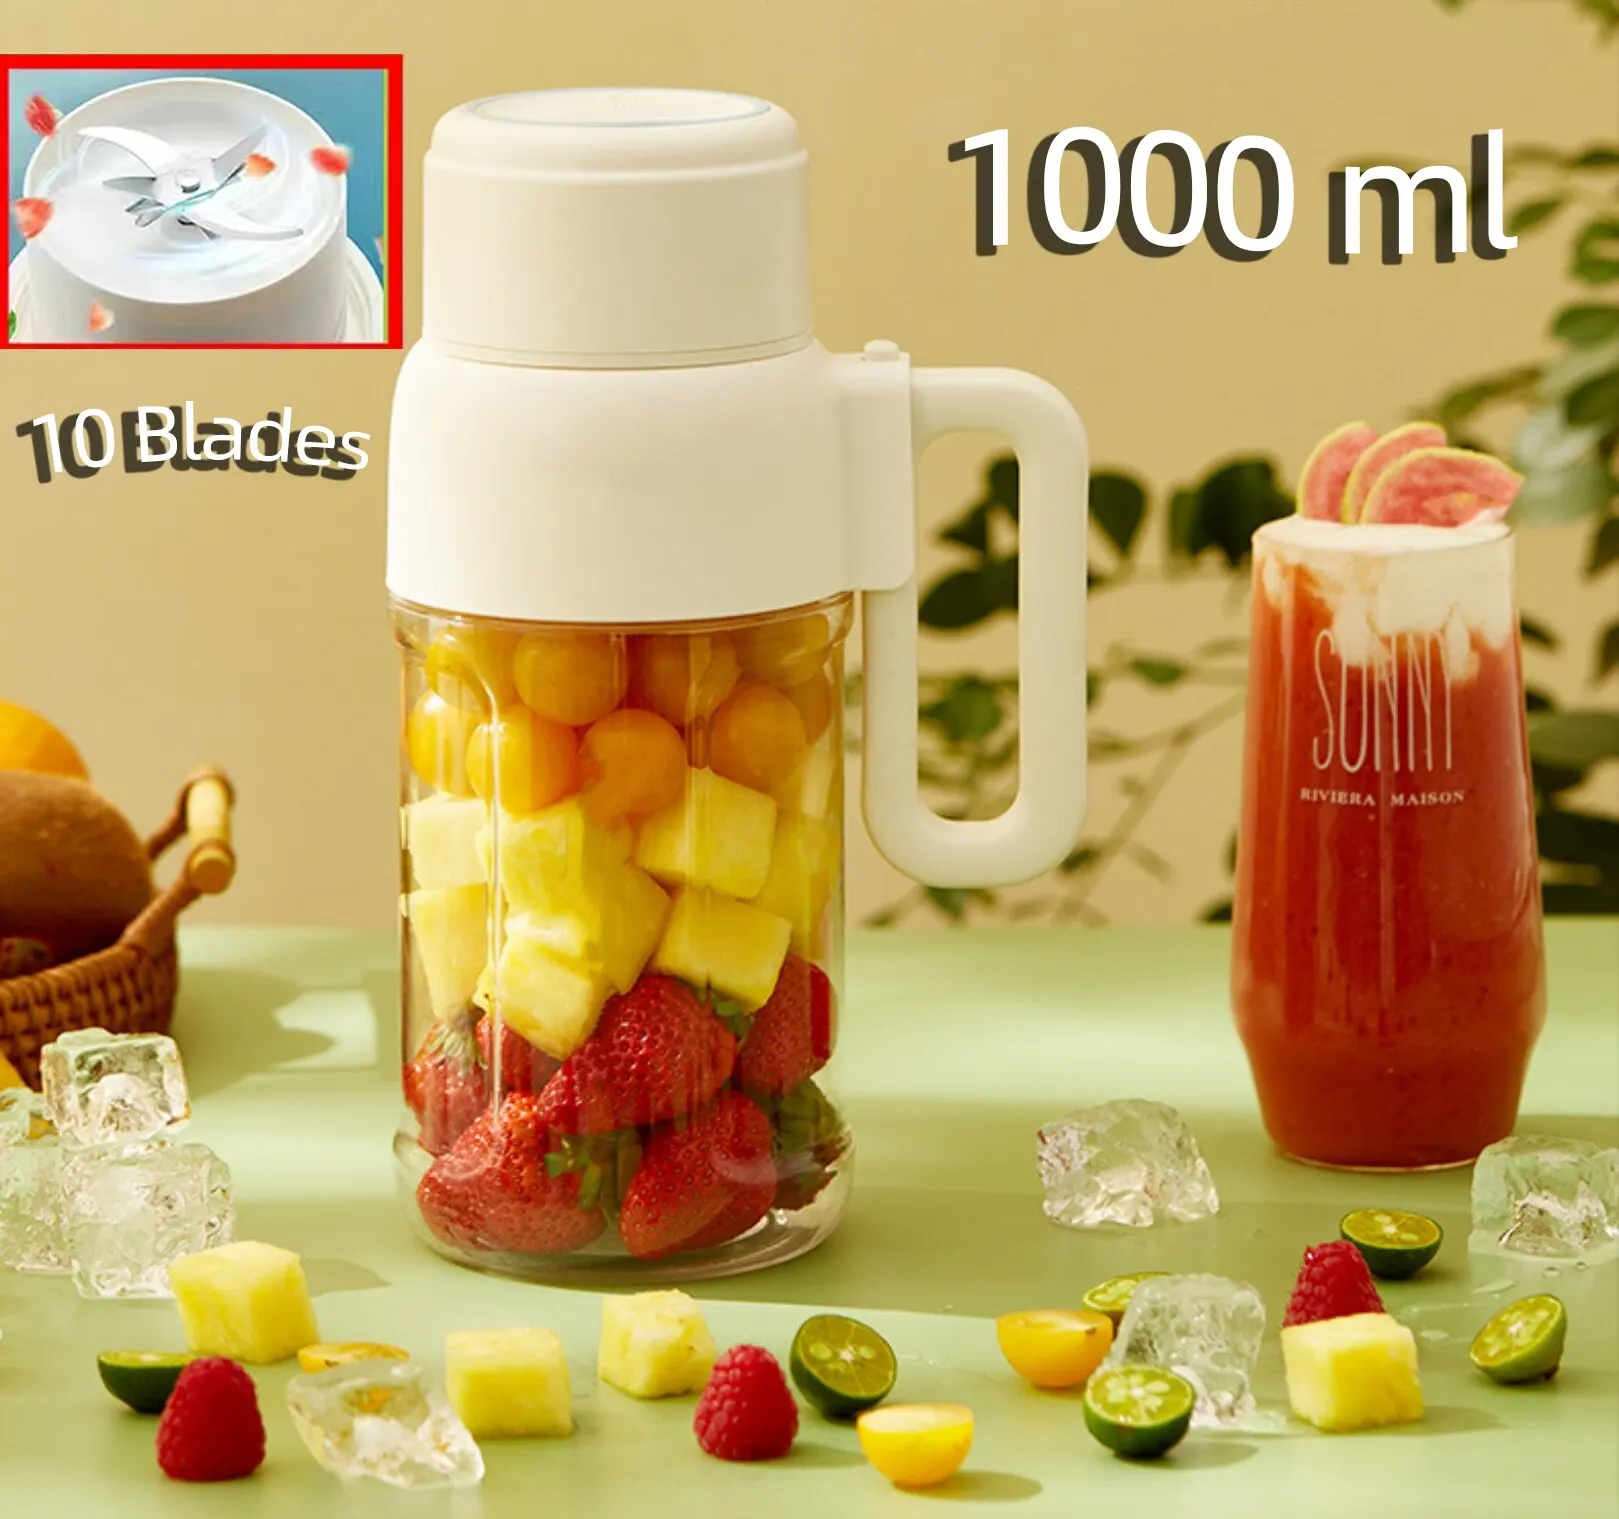 https://ae01.alicdn.com/kf/S813b94006e98460783aebd3217dcc43cN/Portable-Blender-for-Shakes-and-Smoothies-Personal-Blender-with-10-Blades-1000ML-Mini-Blender-Portable-with.jpg